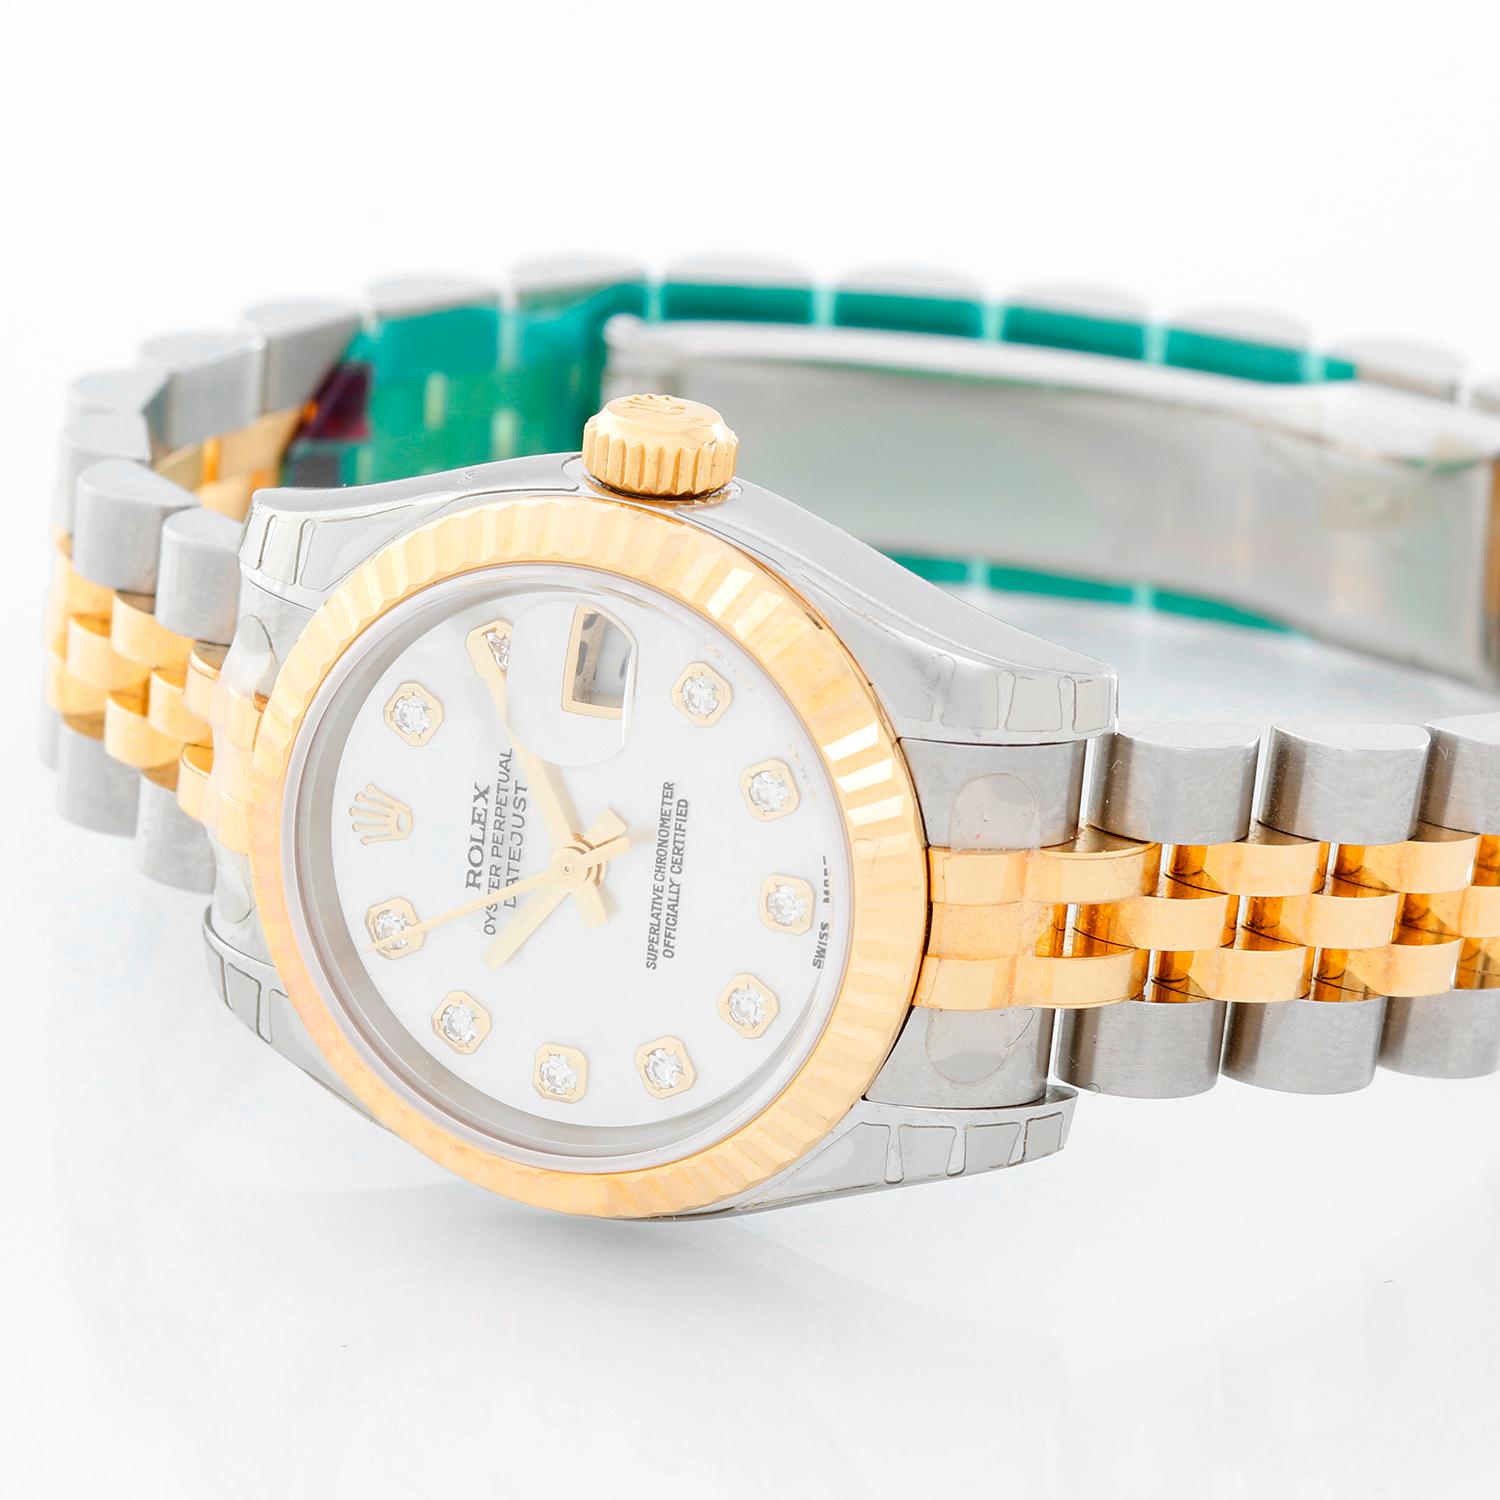 Rolex  Datejust Ladies 2-Tone Diamond Watch Mother of Pearl Dial 179173 - Automatic winding, Quickset, 31 jewels, sapphire crystal. Stainless steel case with 18k yellow gold fluted bezel (26mm diameter). Factory Mother of Pearl diamond dial.